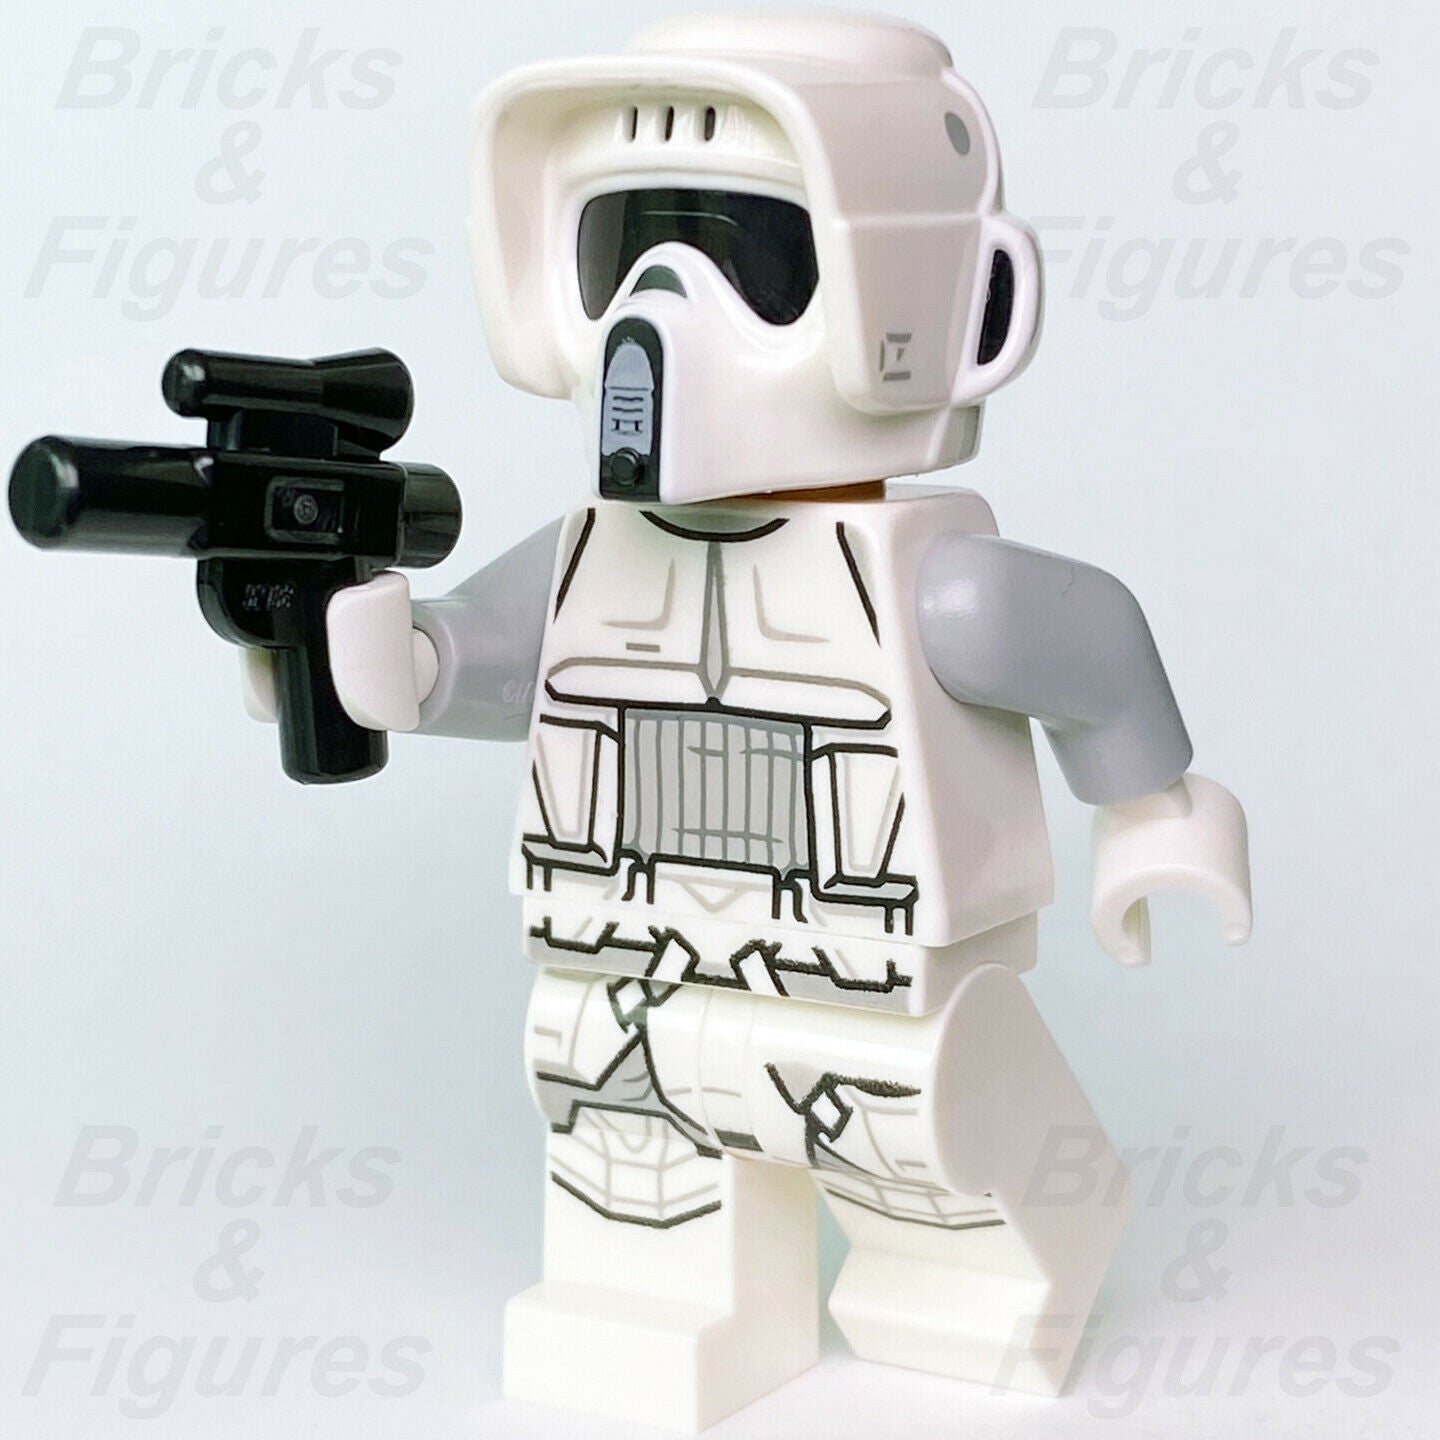 New Star Wars LEGO Scout Trooper Imperial Hoth Female Minifigure 75320 sw1182 - Bricks & Figures